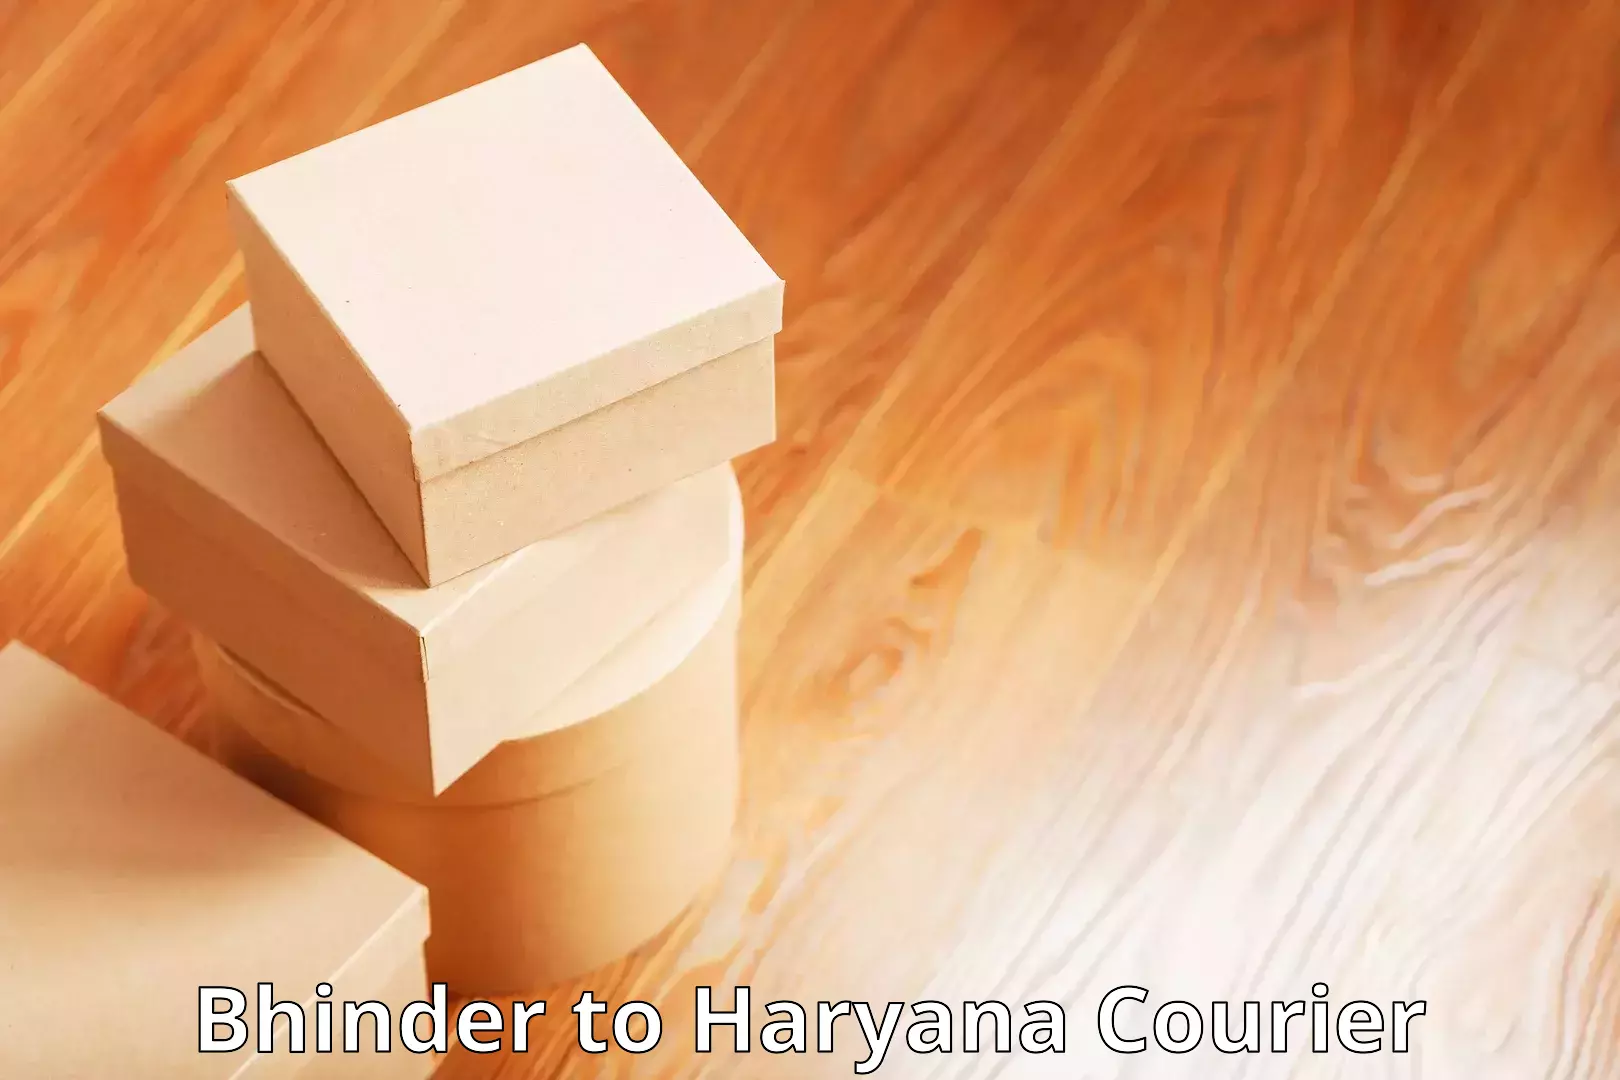 State-of-the-art courier technology Bhinder to Narwana